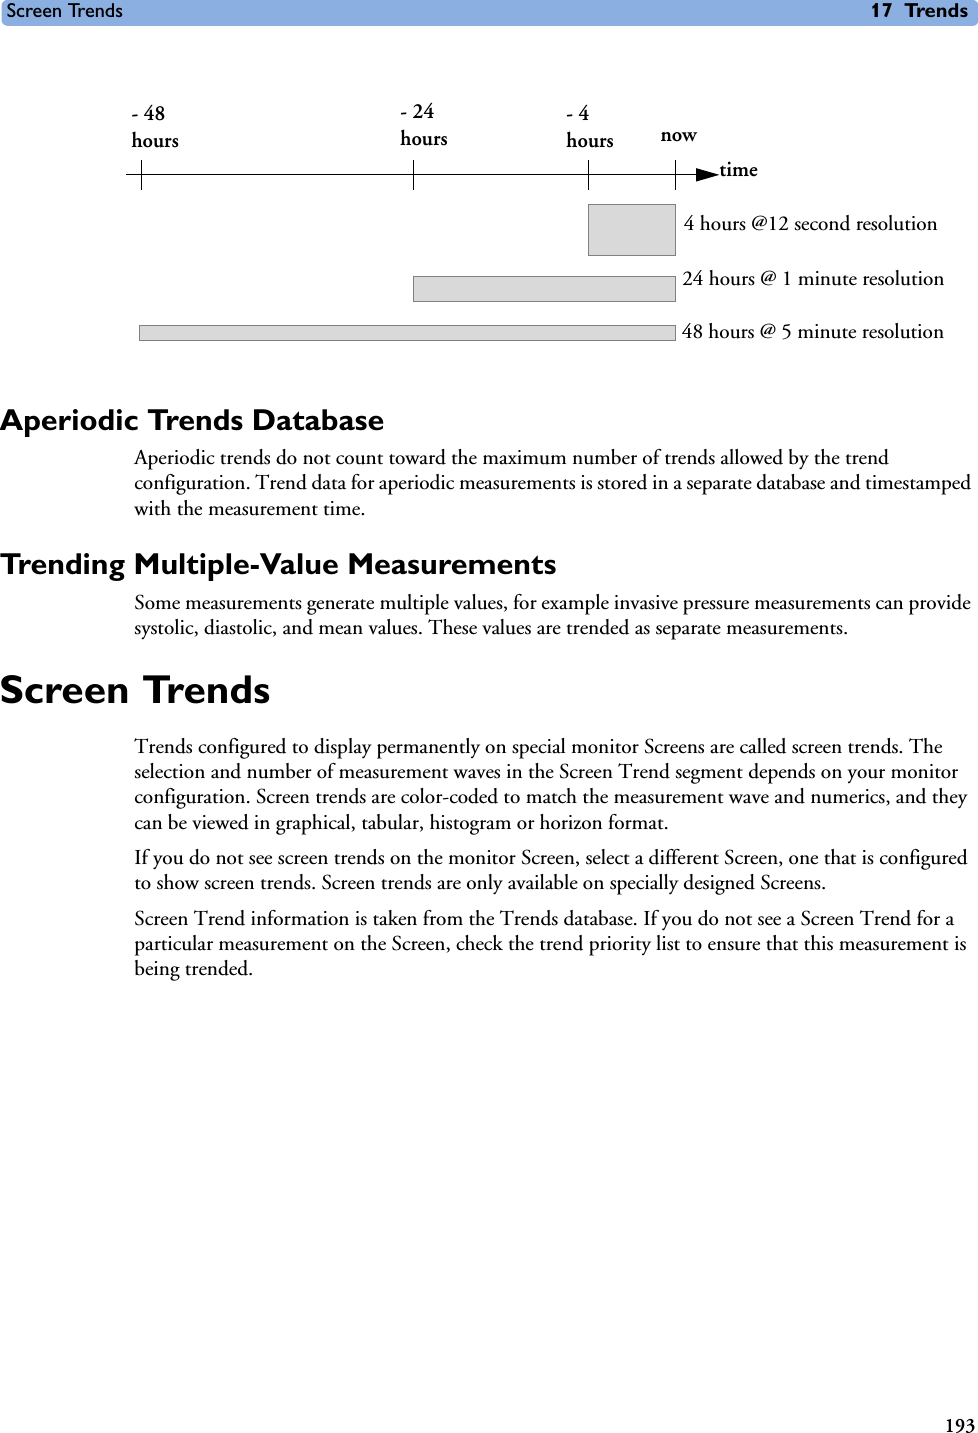 Screen Trends 17 Trends193Aperiodic Trends DatabaseAperiodic trends do not count toward the maximum number of trends allowed by the trend configuration. Trend data for aperiodic measurements is stored in a separate database and timestamped with the measurement time. Trending Multiple-Value MeasurementsSome measurements generate multiple values, for example invasive pressure measurements can provide systolic, diastolic, and mean values. These values are trended as separate measurements.Screen TrendsTrends configured to display permanently on special monitor Screens are called screen trends. The selection and number of measurement waves in the Screen Trend segment depends on your monitor configuration. Screen trends are color-coded to match the measurement wave and numerics, and they can be viewed in graphical, tabular, histogram or horizon format.If you do not see screen trends on the monitor Screen, select a different Screen, one that is configured to show screen trends. Screen trends are only available on specially designed Screens.Screen Trend information is taken from the Trends database. If you do not see a Screen Trend for a particular measurement on the Screen, check the trend priority list to ensure that this measurement is being trended. - 48 hours- 24 hours- 4 hours nowtime4 hours @12 second resolution24 hours @ 1 minute resolution48 hours @ 5 minute resolution